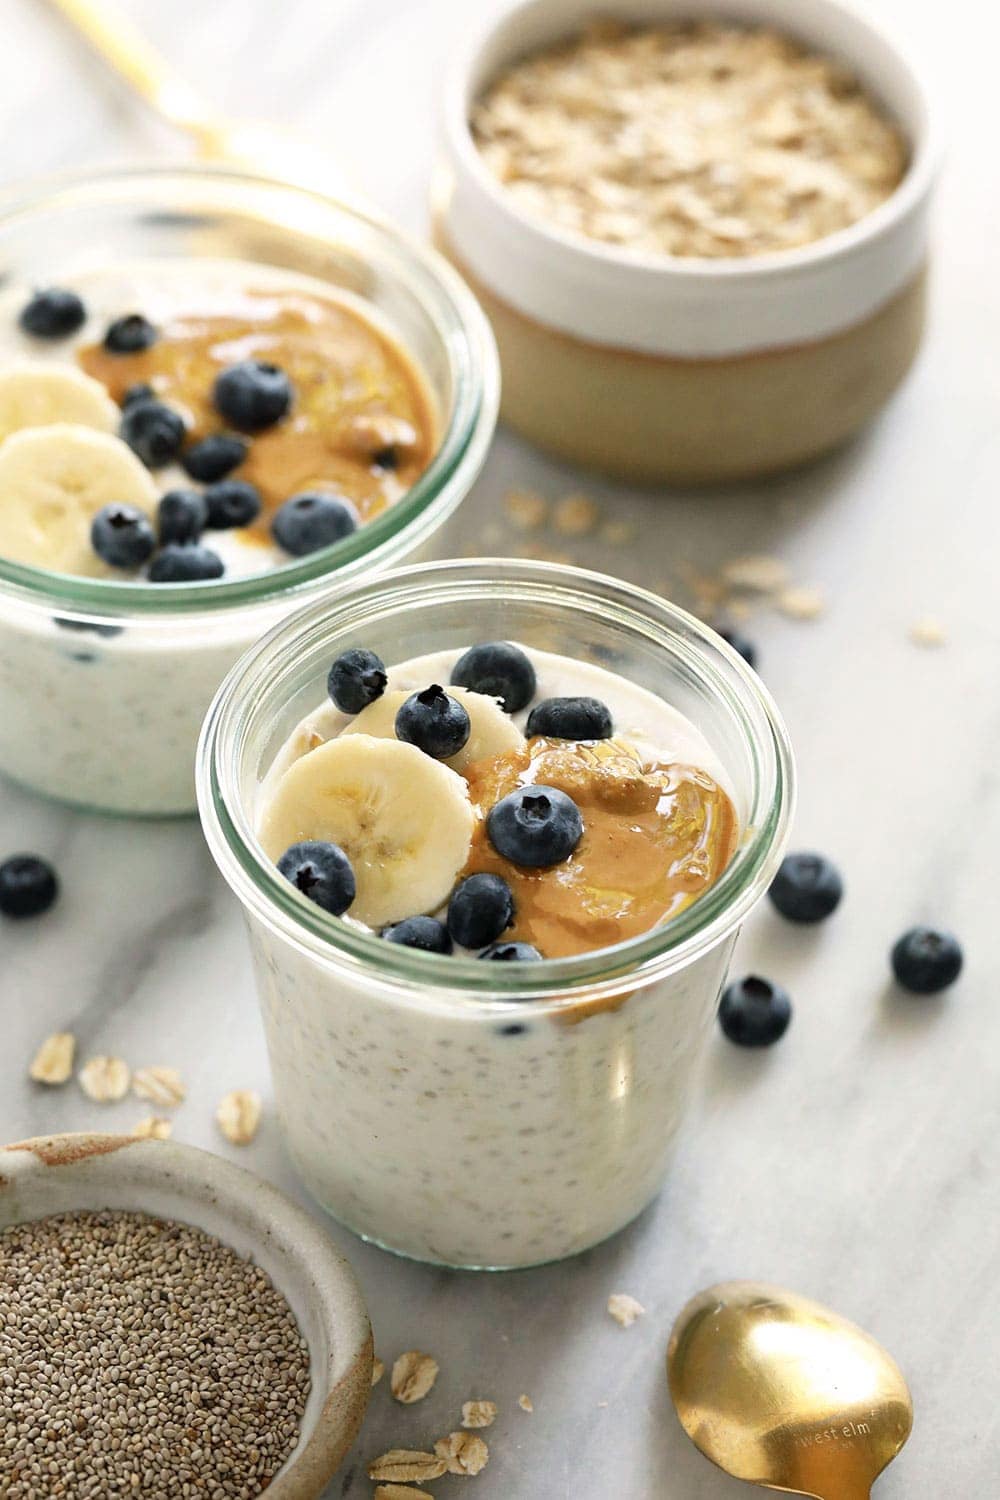 How to Make Overnight Oats (+ 8 flavors!) - eSuper Food